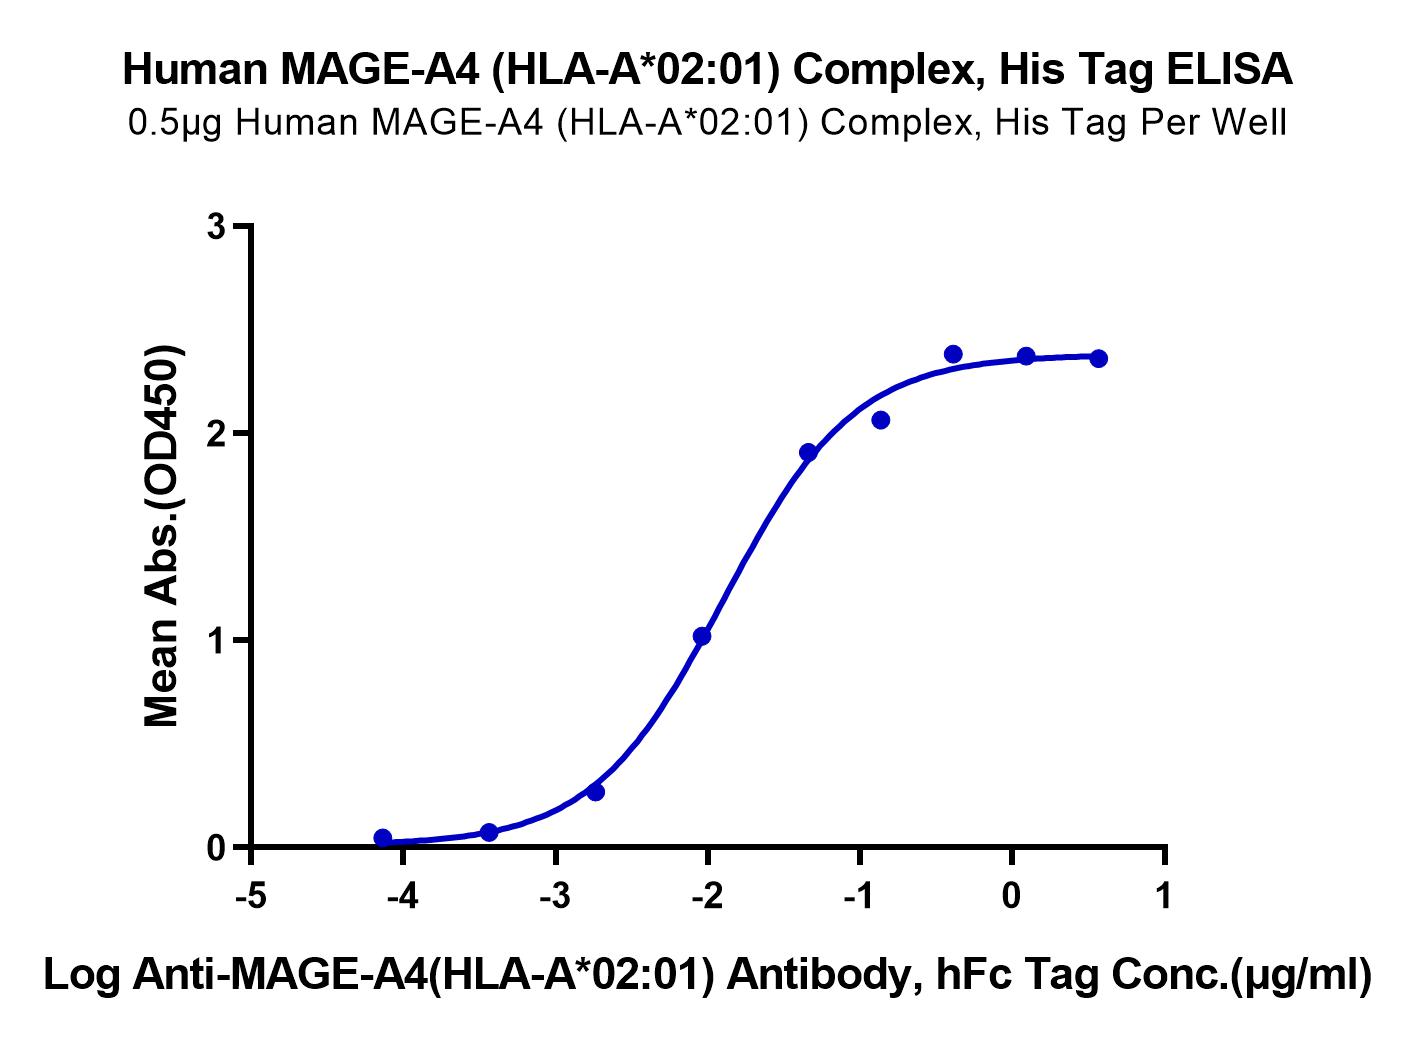 Human MAGE-A4 (HLA-A*02:01) Protein (LTP10827)